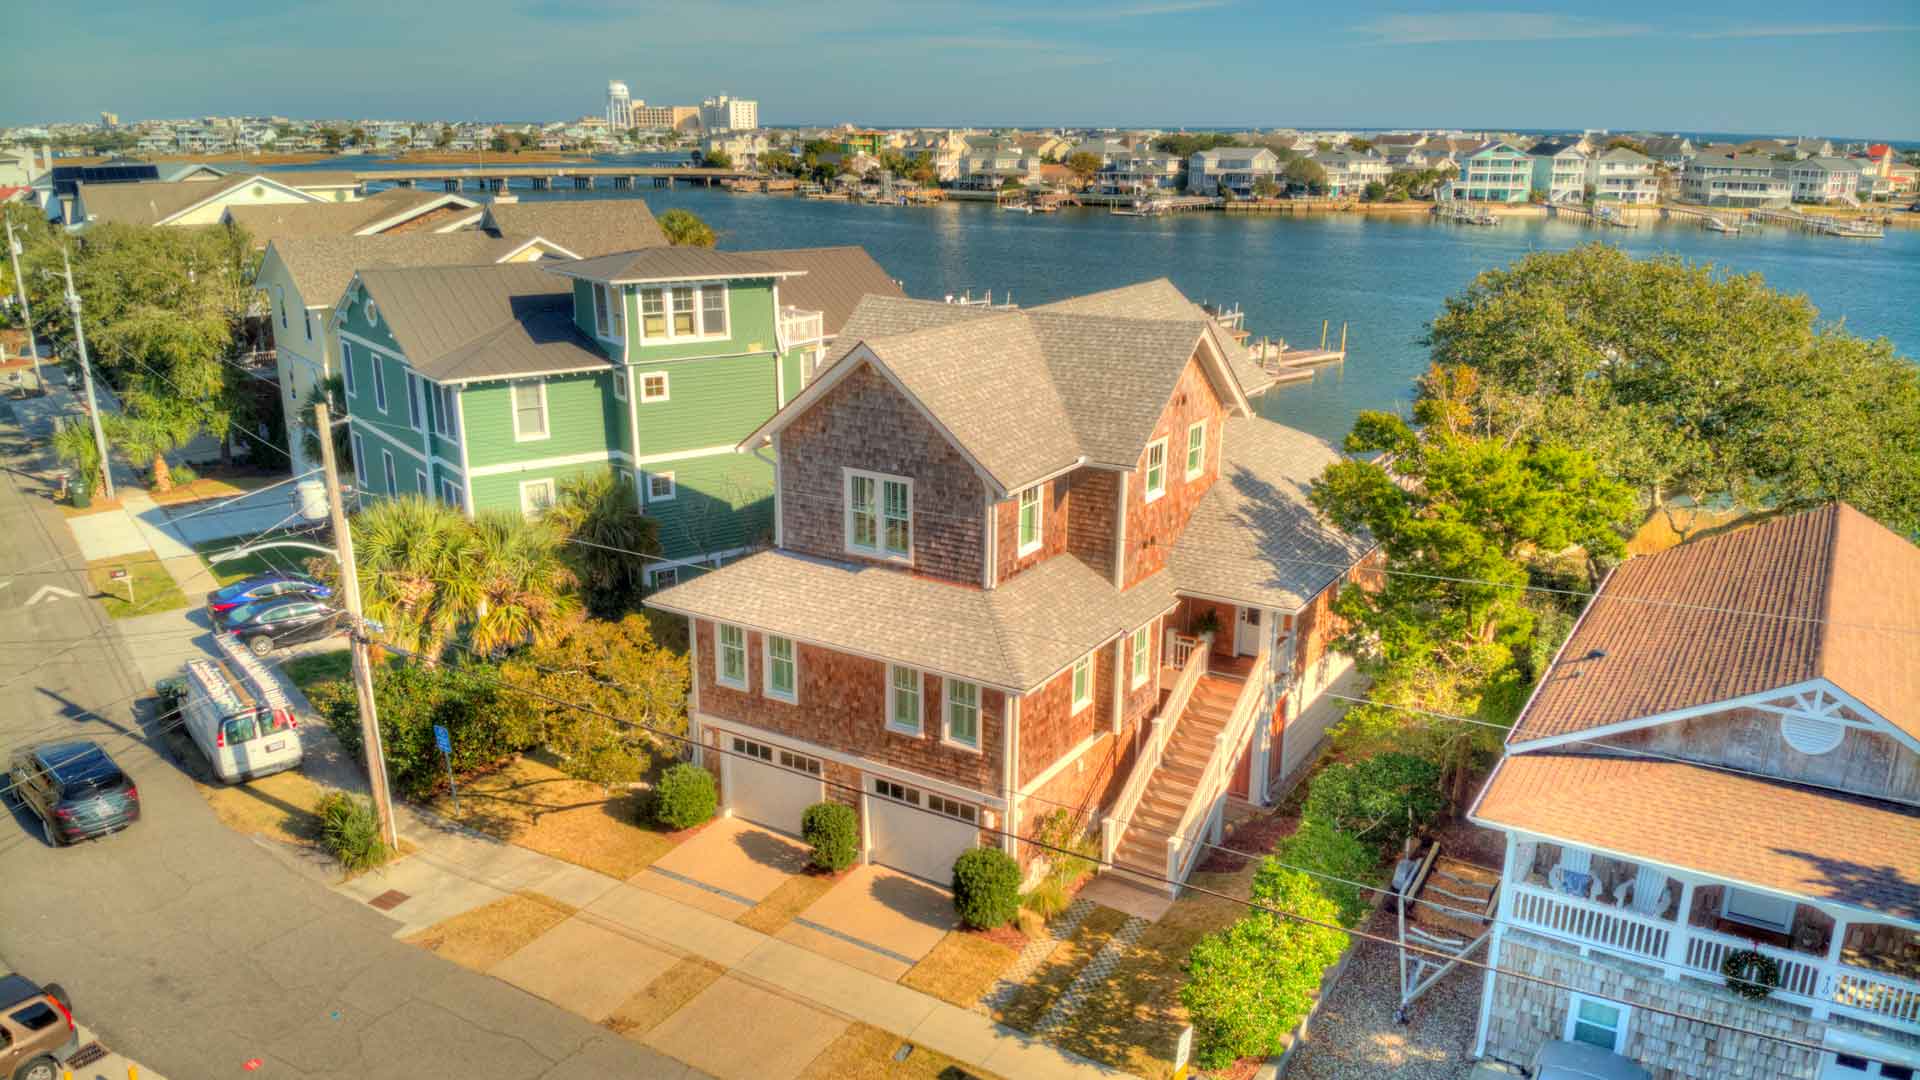 Photo of New Home built on Banks Channel in Wrightsville Beach